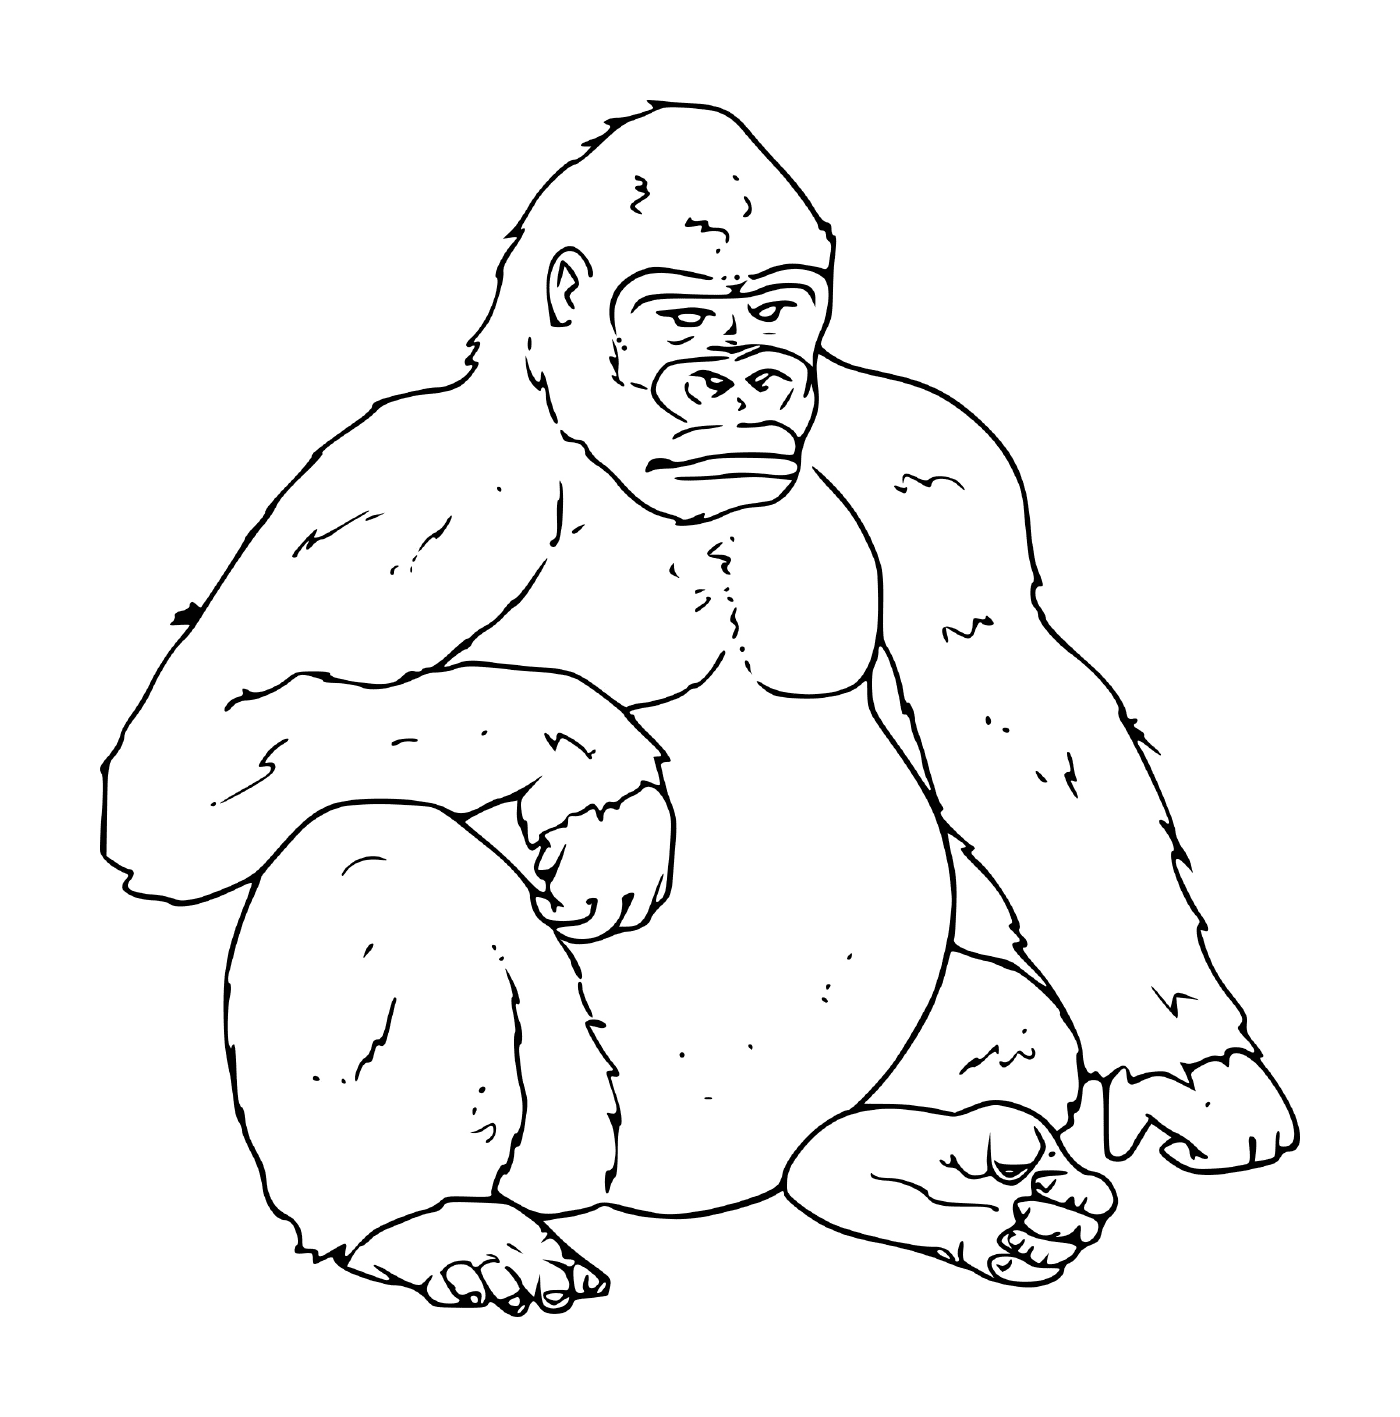  a gorilla sitting on the ground of the jungle 